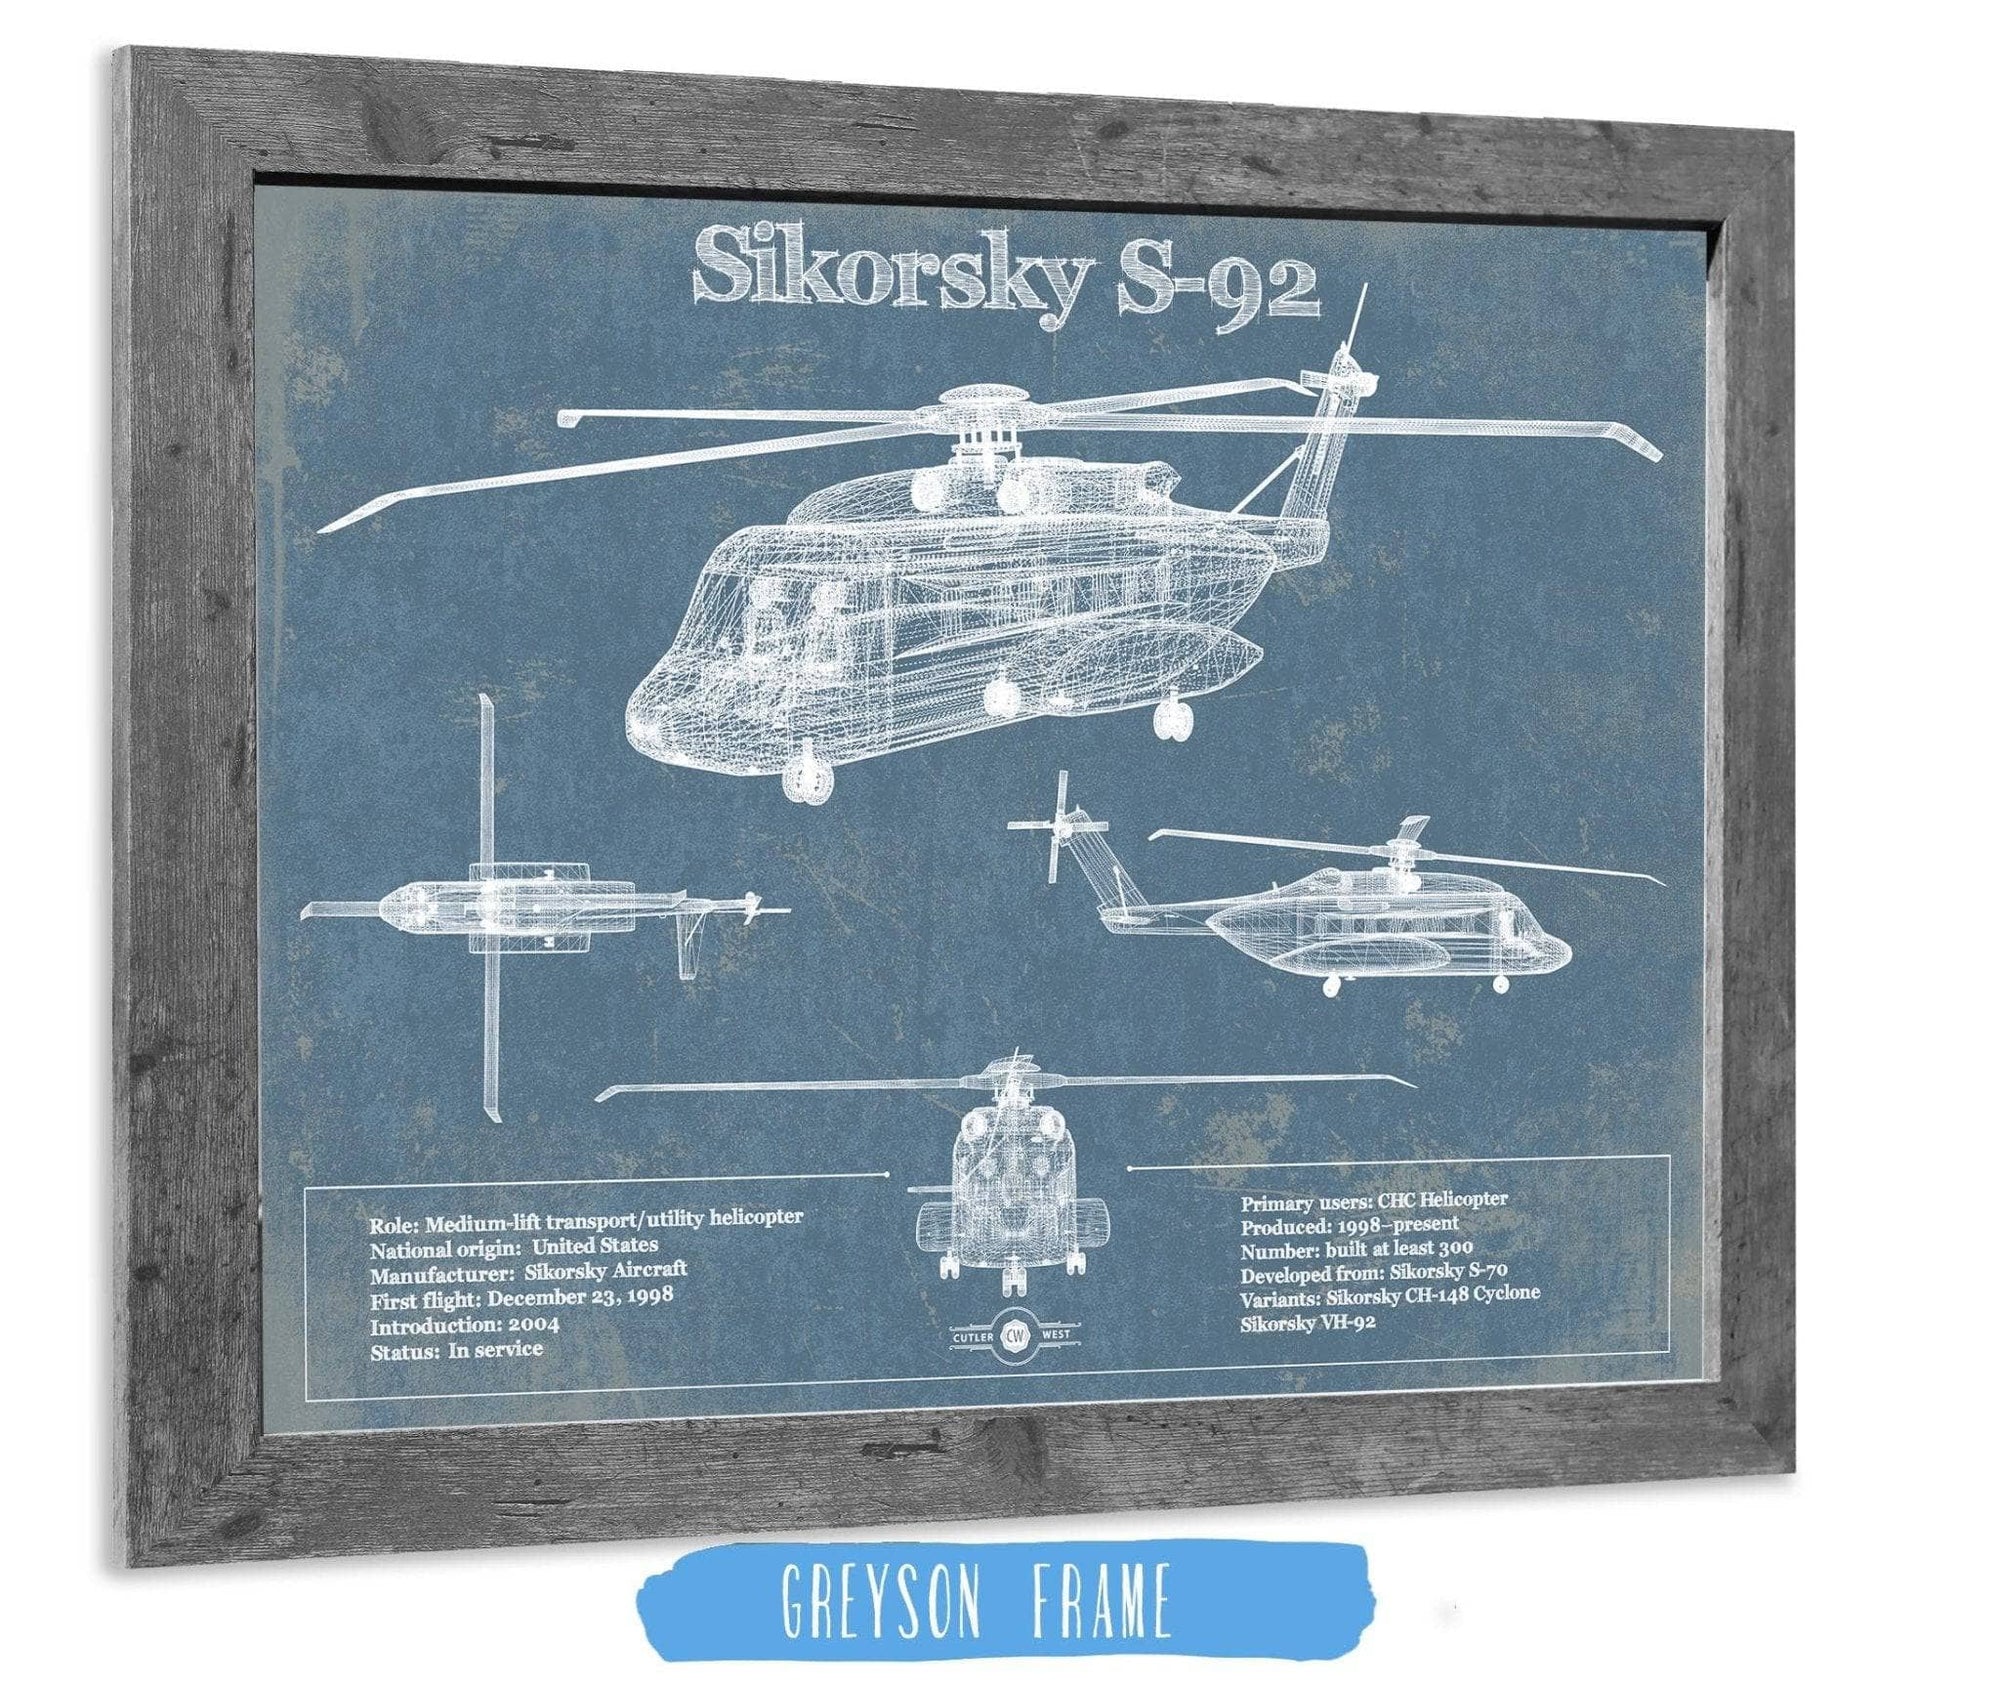 Cutler West Military Aircraft 14" x 11" / Greyson Frame Sikorsky S-92 Helicopter Vintage Aviation Blueprint Military Print 833110073_19853